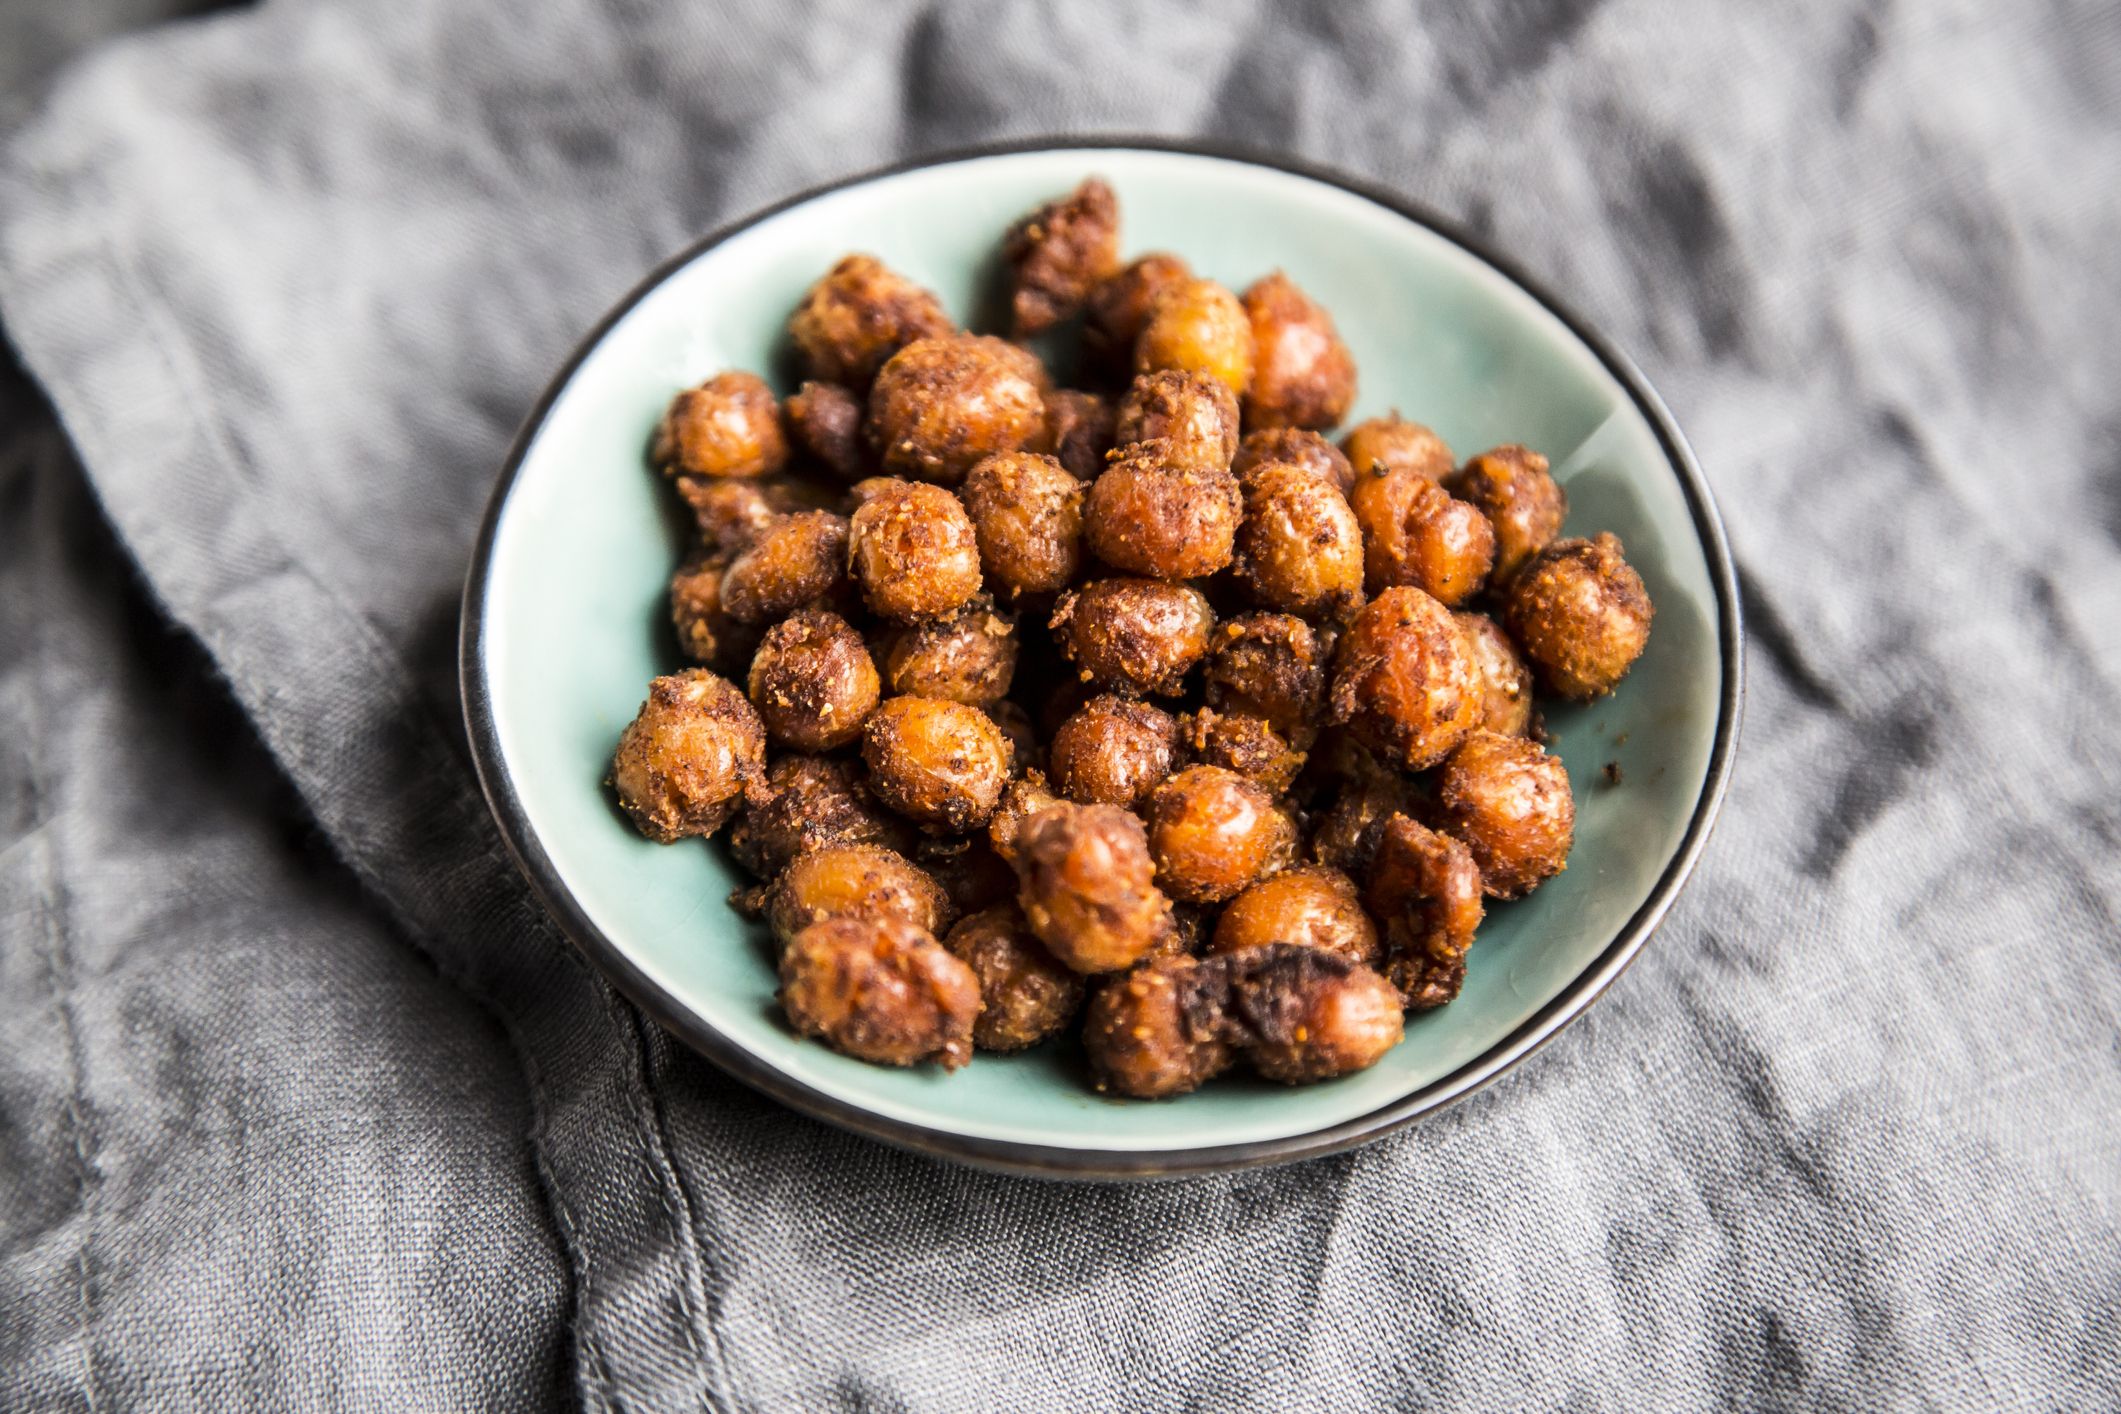 https://hips.hearstapps.com/hmg-prod/images/roasted-chickpeas-in-bowl-royalty-free-image-1640715012.jpg